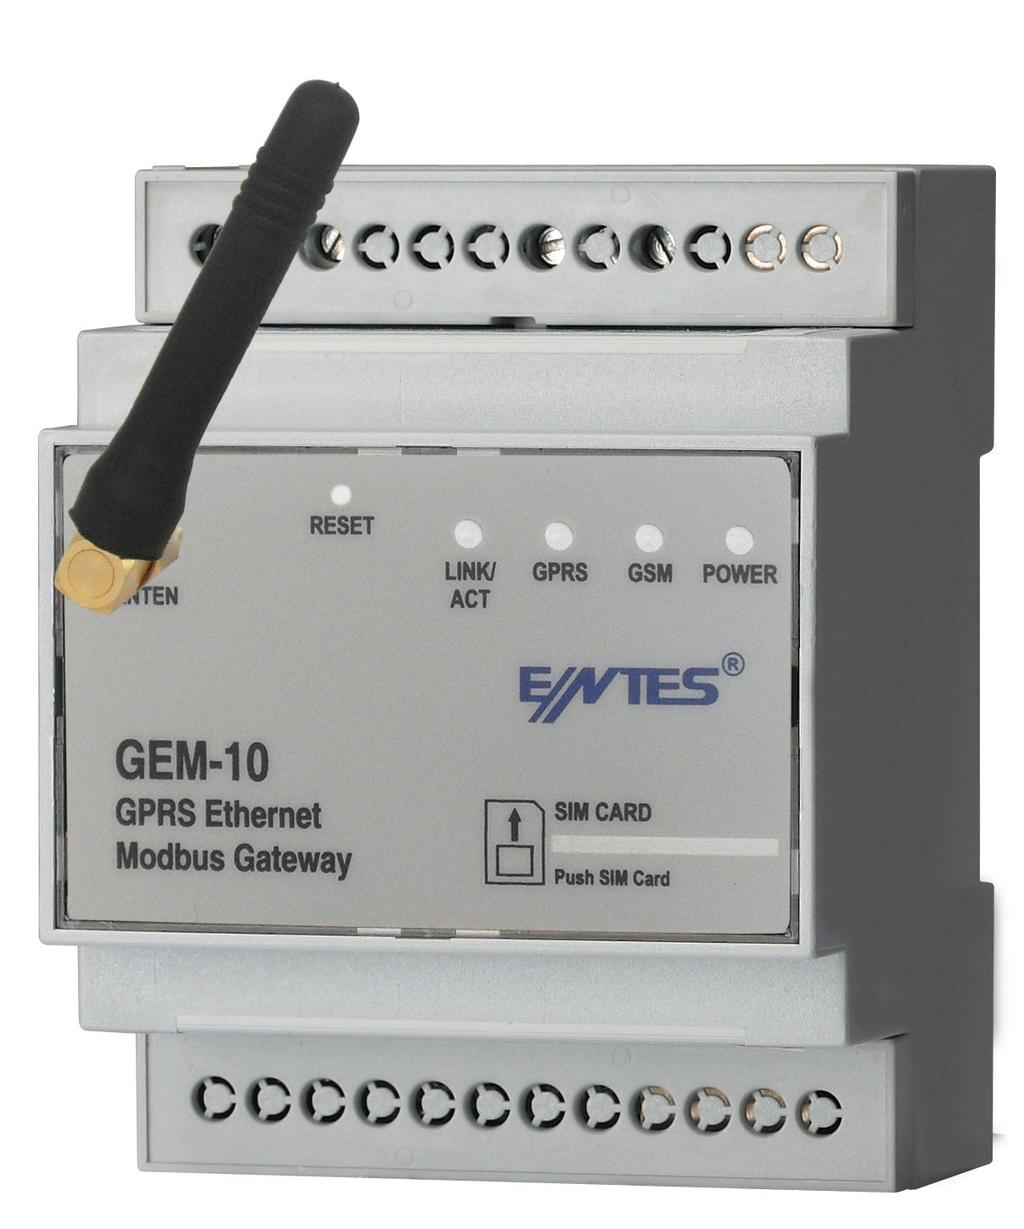 1.Introduction 1.1 General Features ENTES GEM-10 GPRS/Modbus Gateway allows you to connect to your devices which communicate using Modbus protocol via GPRS or Ethernet network.